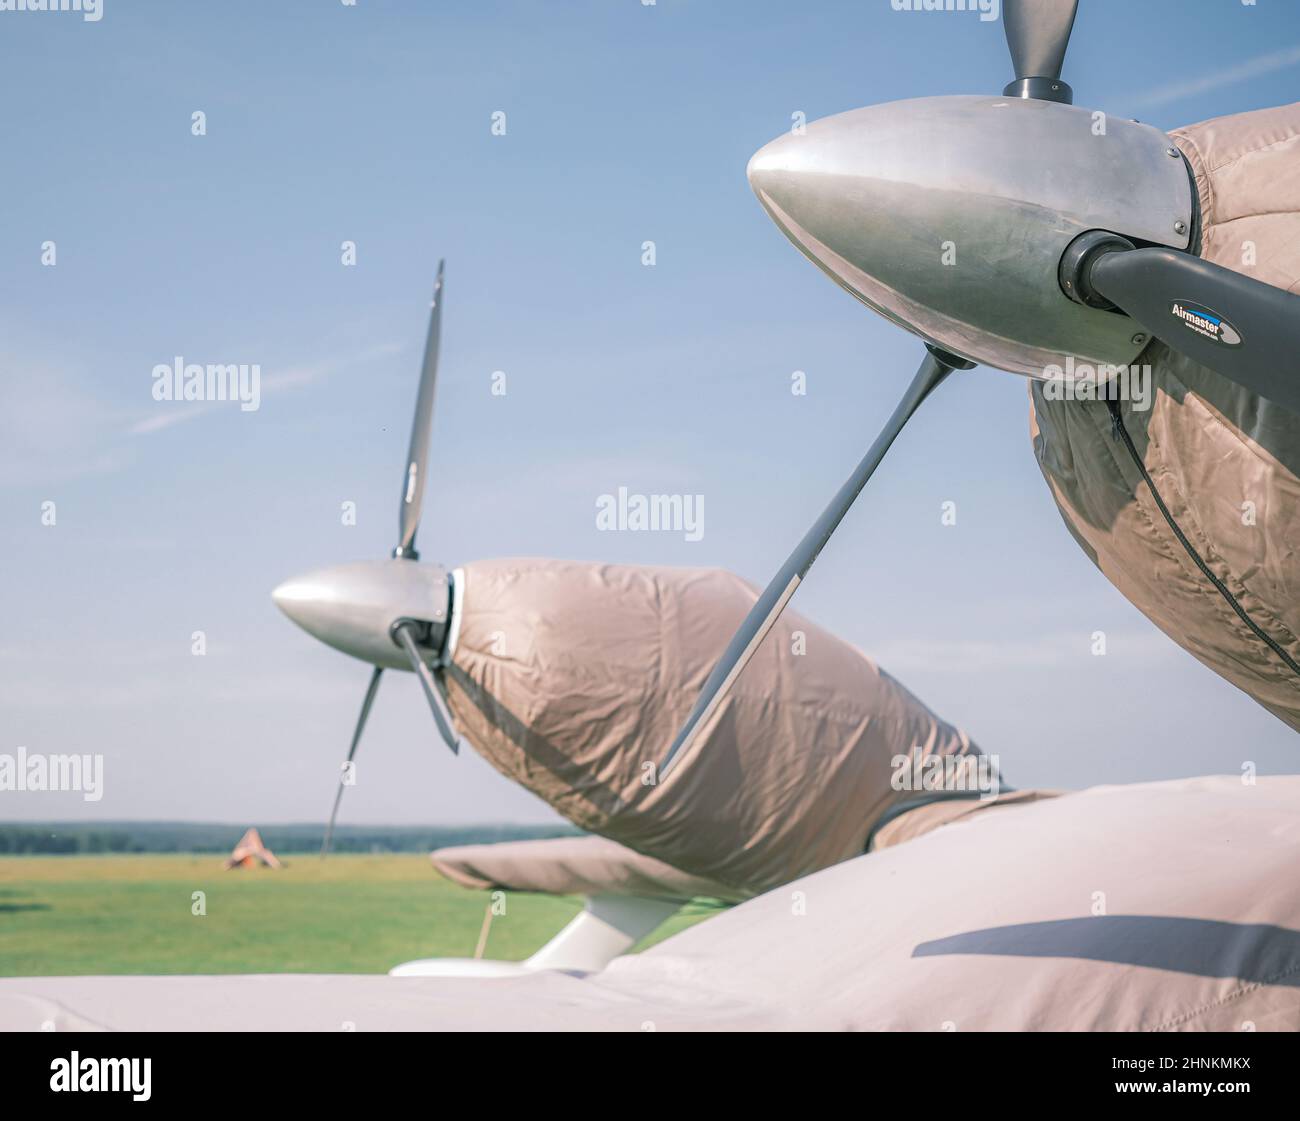 3 July 2021, Russia, Kemerovo, propellers of small parked airplane Stock Photo